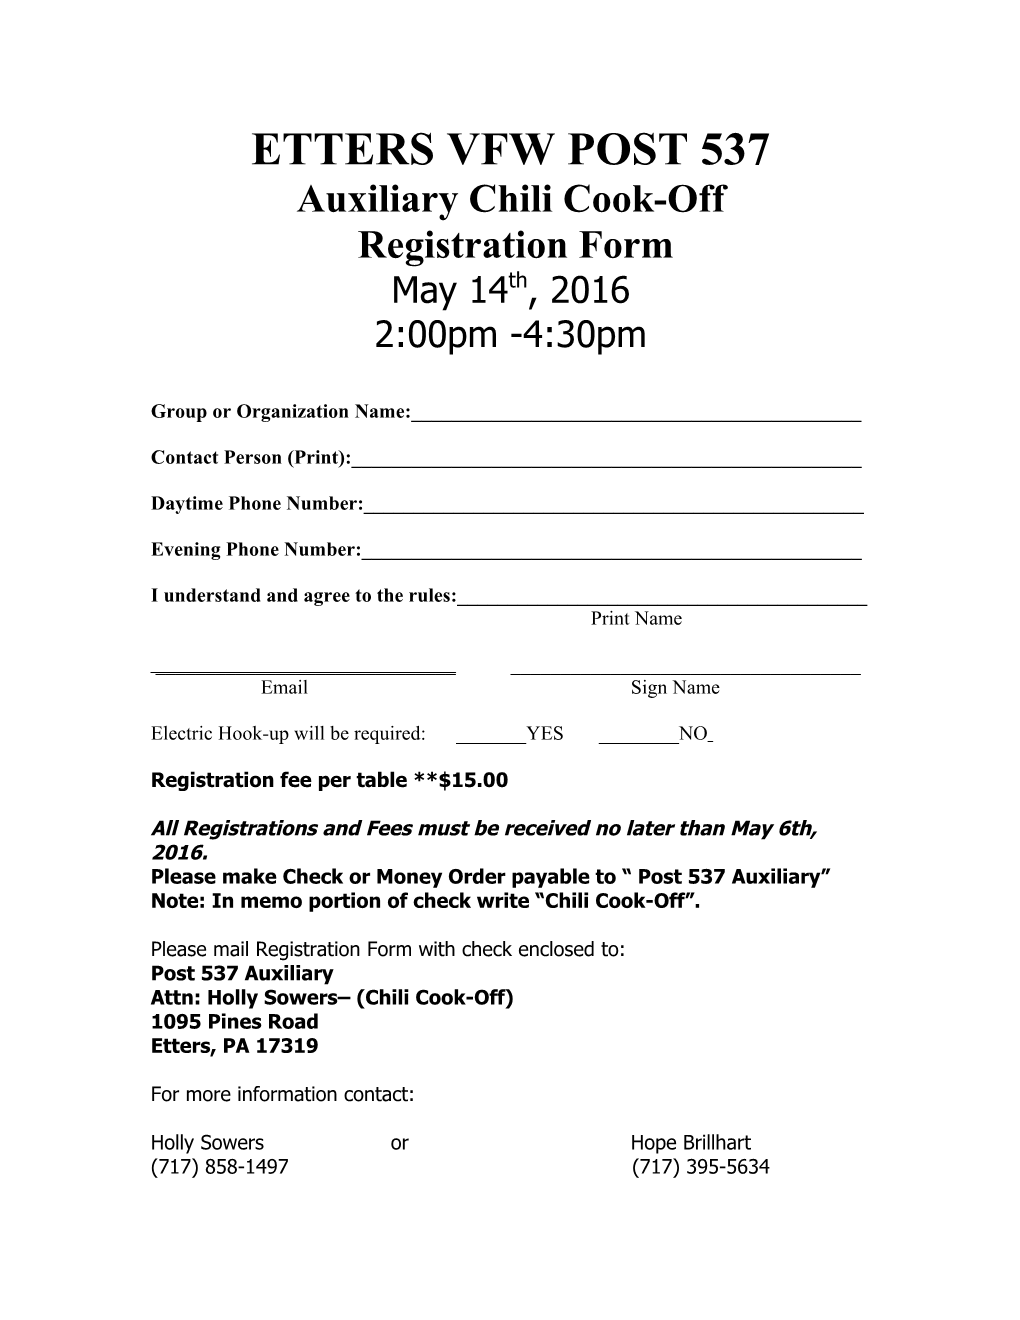 Auxiliary Chili Cook-Off